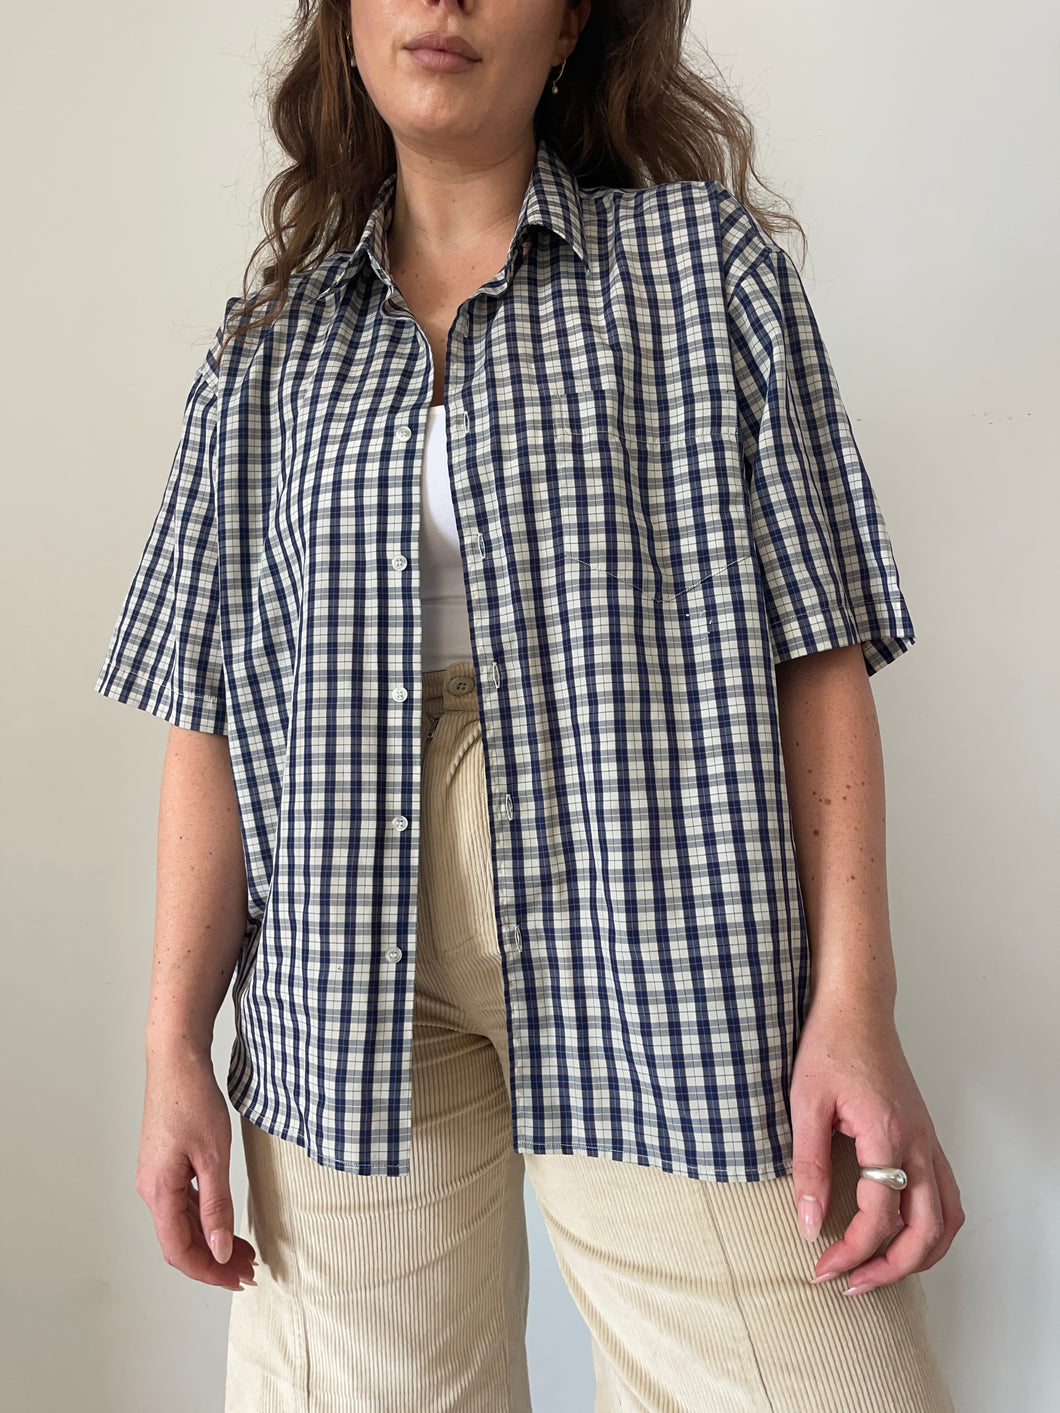 Vintage Whitmont Checked Button Up Shirt (L)